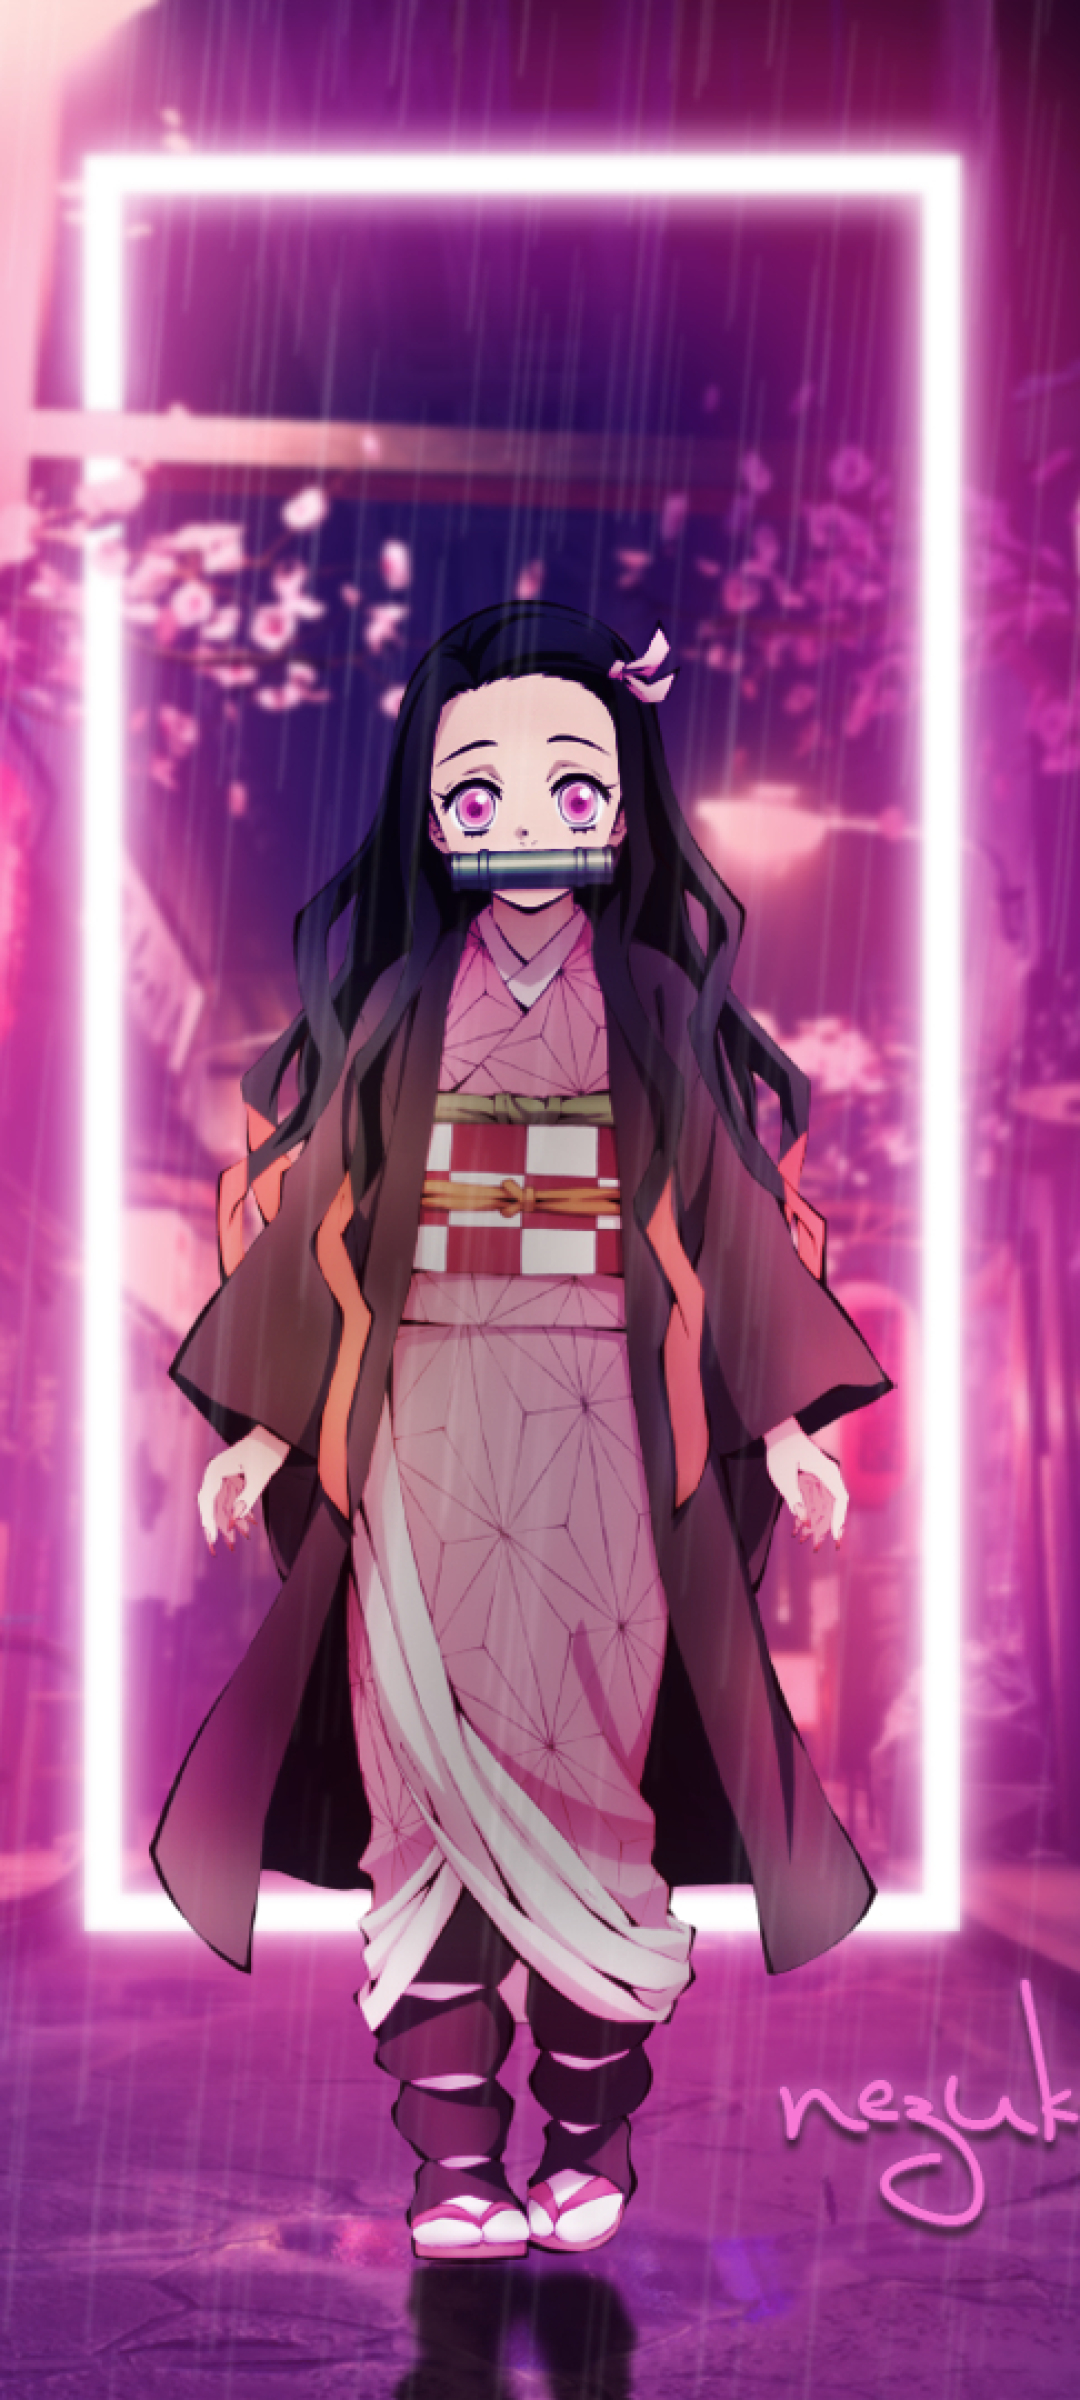 1080x2400 Nezuko Demon Slayer 1080x2400 Resolution Wallpaper Hd Games 4k Wallpapers Images Photos And Background Wallpapers Den